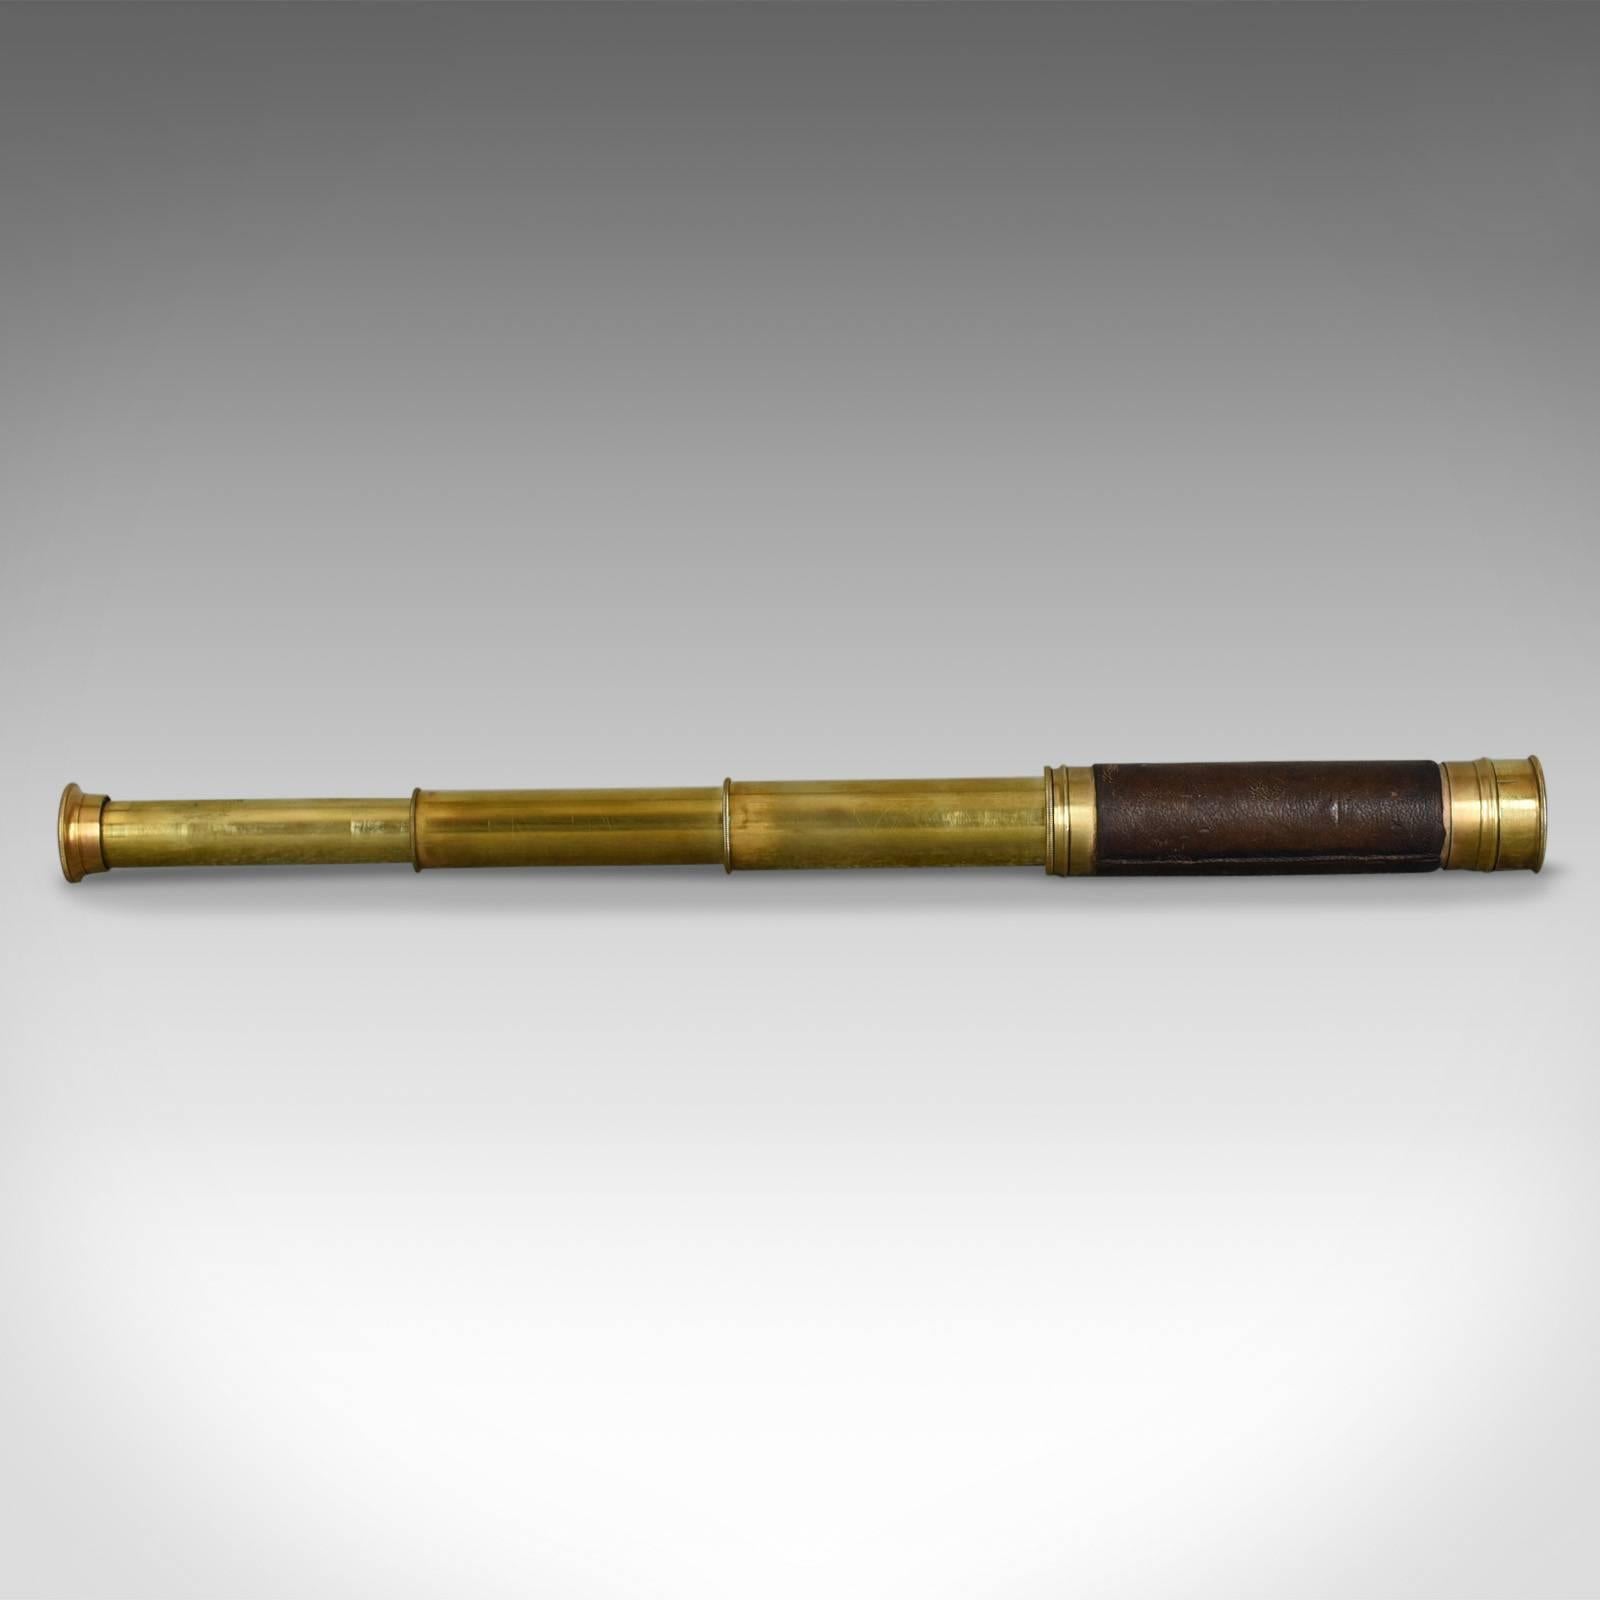 This is an antique telescope, a three-draw pocket telescope in leather case, a refractor for terrestrial or astronomical use dating to circa 1880.

Perfect for bird watching, landscape appreciation, wildlife, or maritime observation. Equally